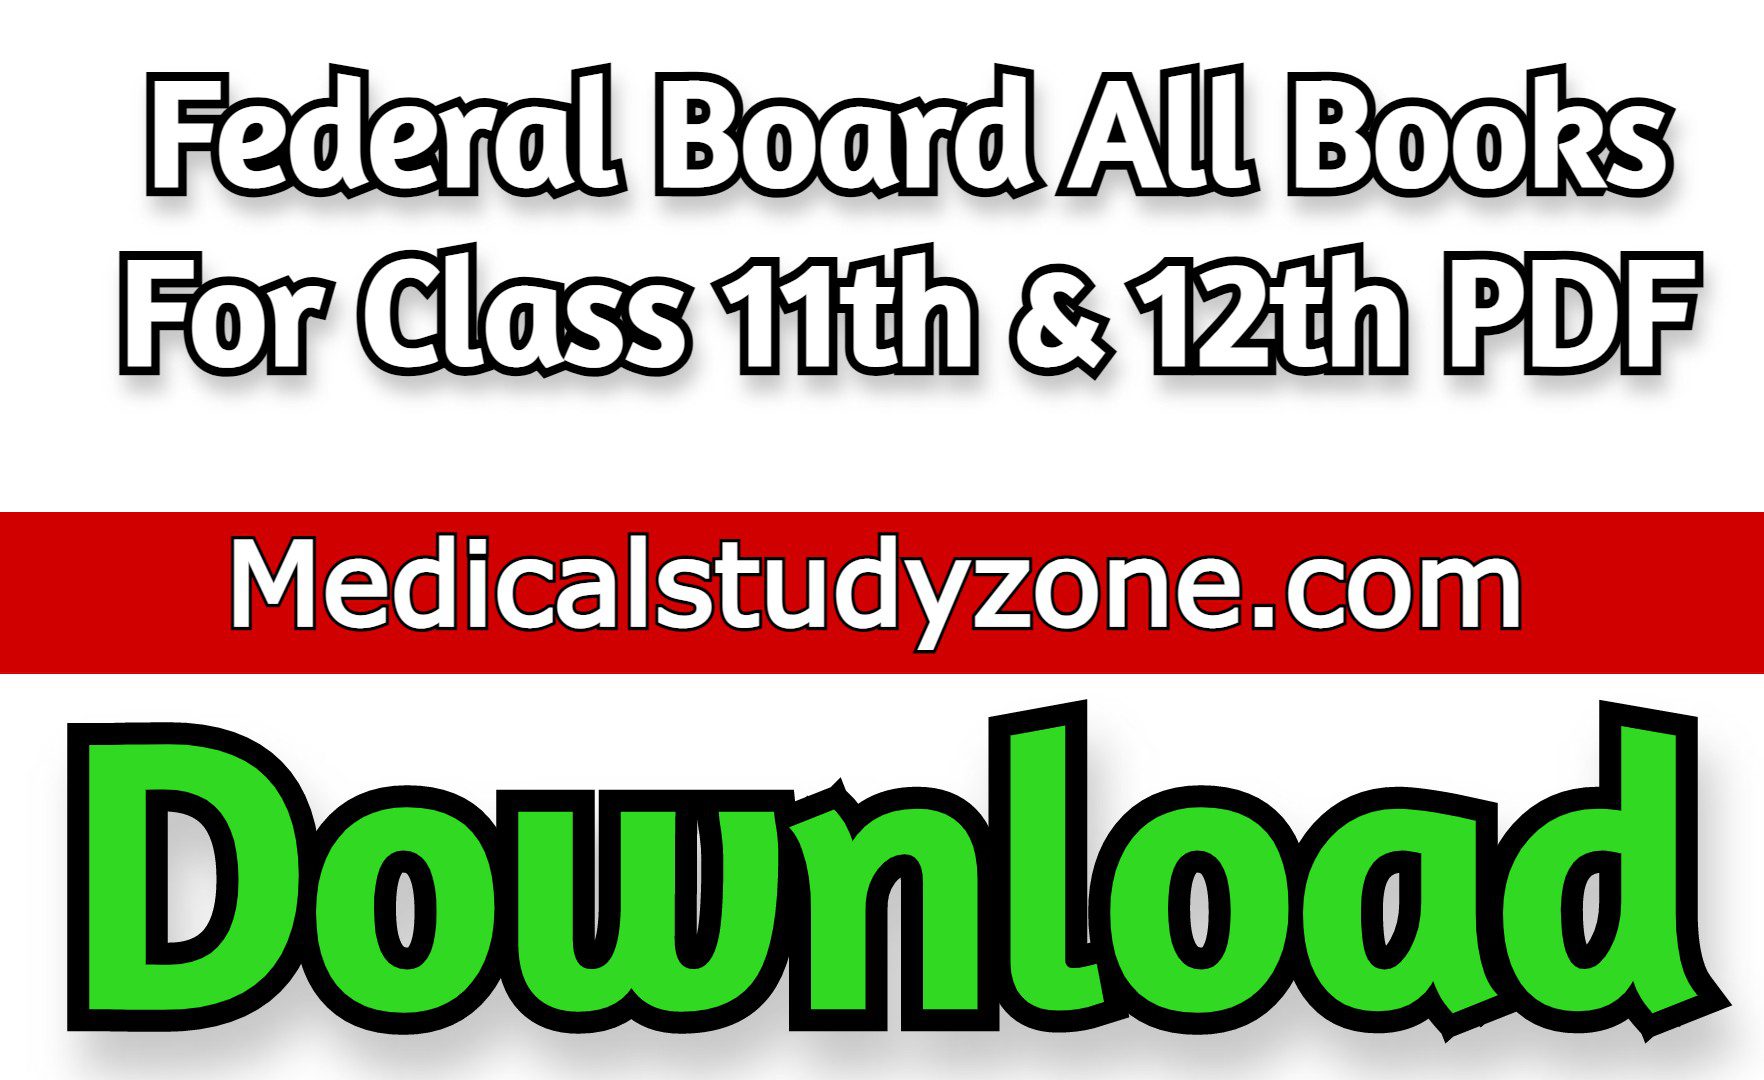 Federal Board All Books For Class 11th & 12th PDF 2023 Free Download